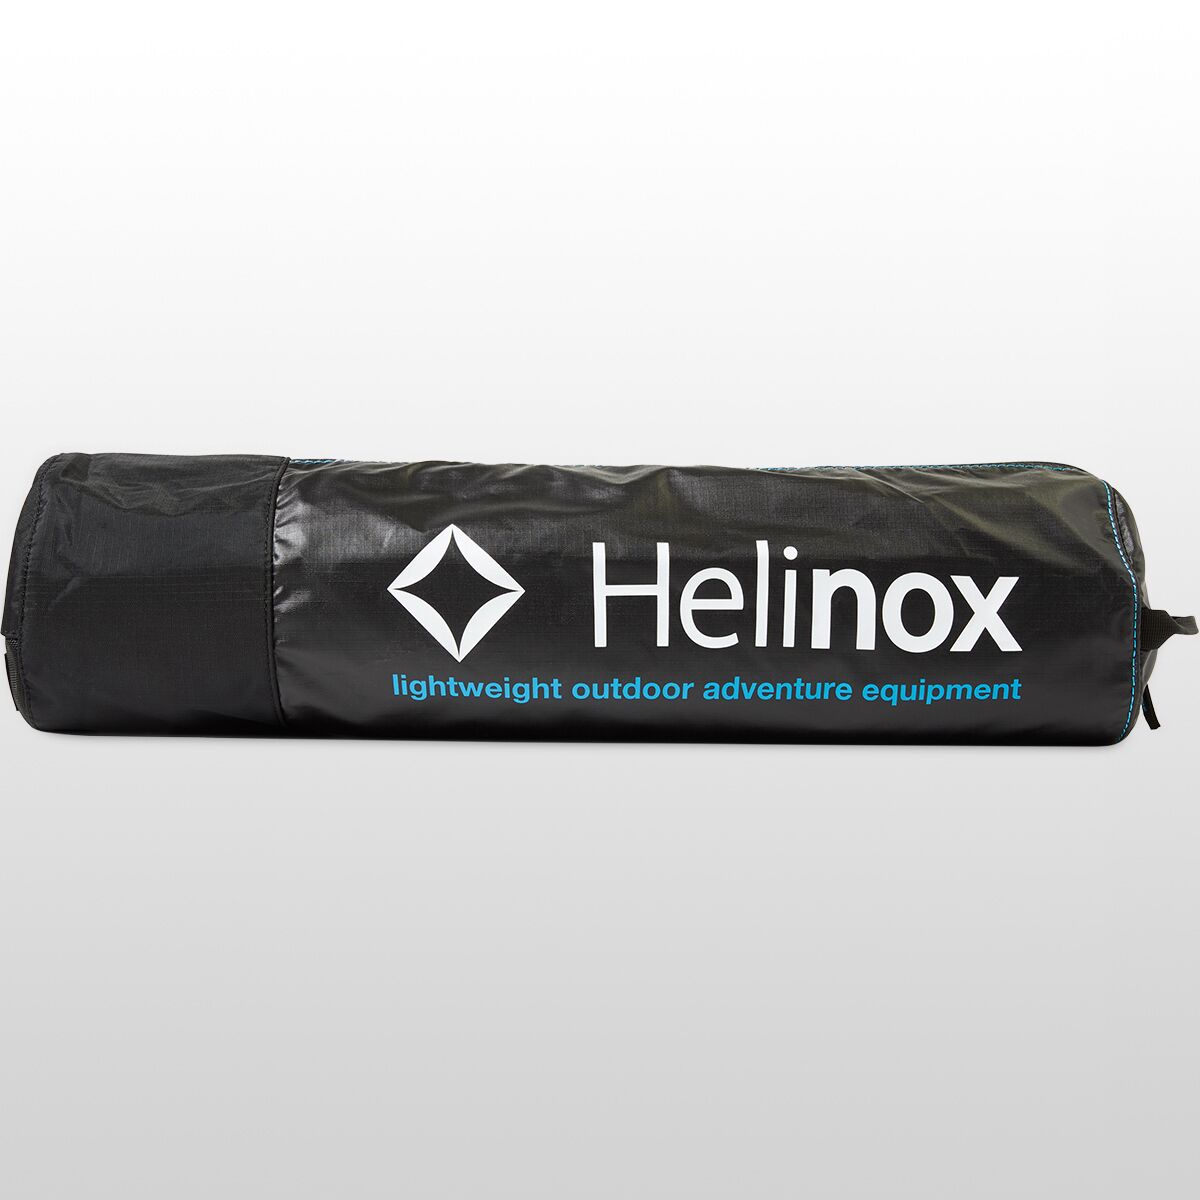  Helinox Cot One Convertible Camp Cot - Hike & Camp